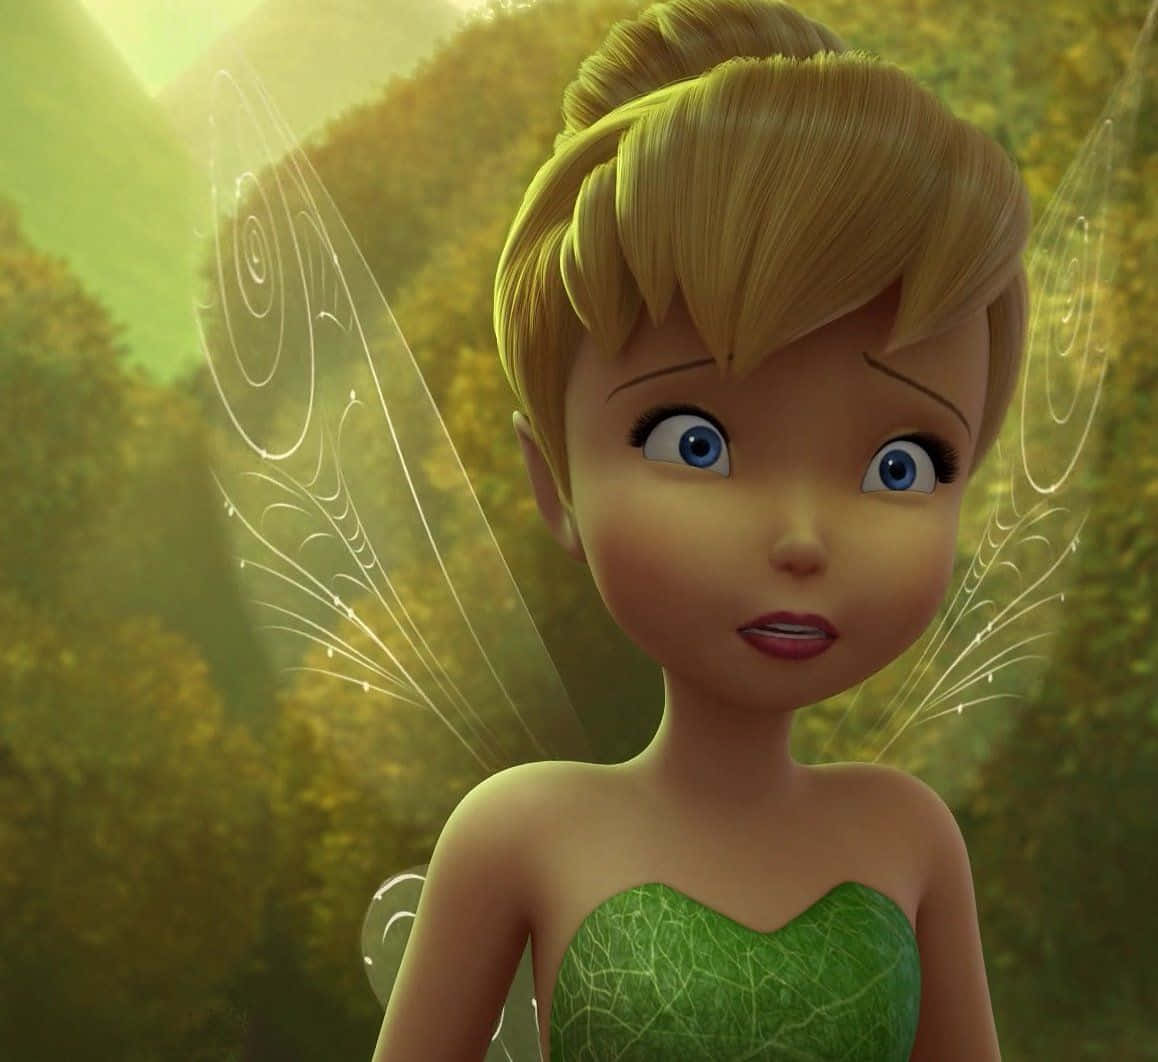 Tinkerbell, the beloved Disney character, takes flight.